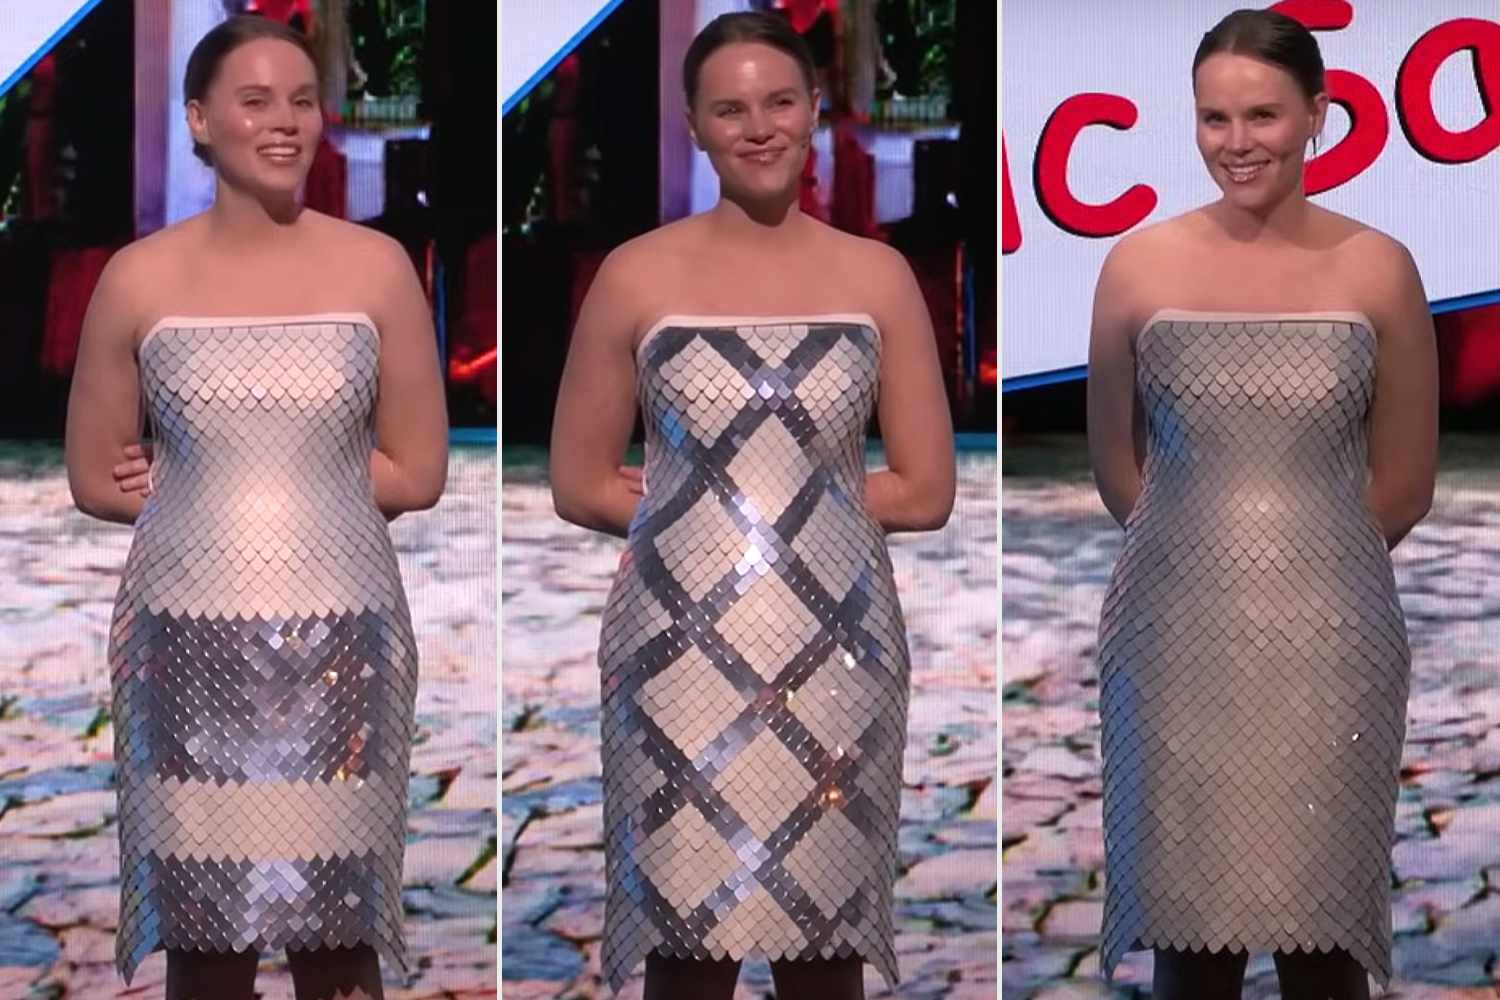 Adobe's Project Primrose Unveils Interactive Dress That Changes Design Every Second